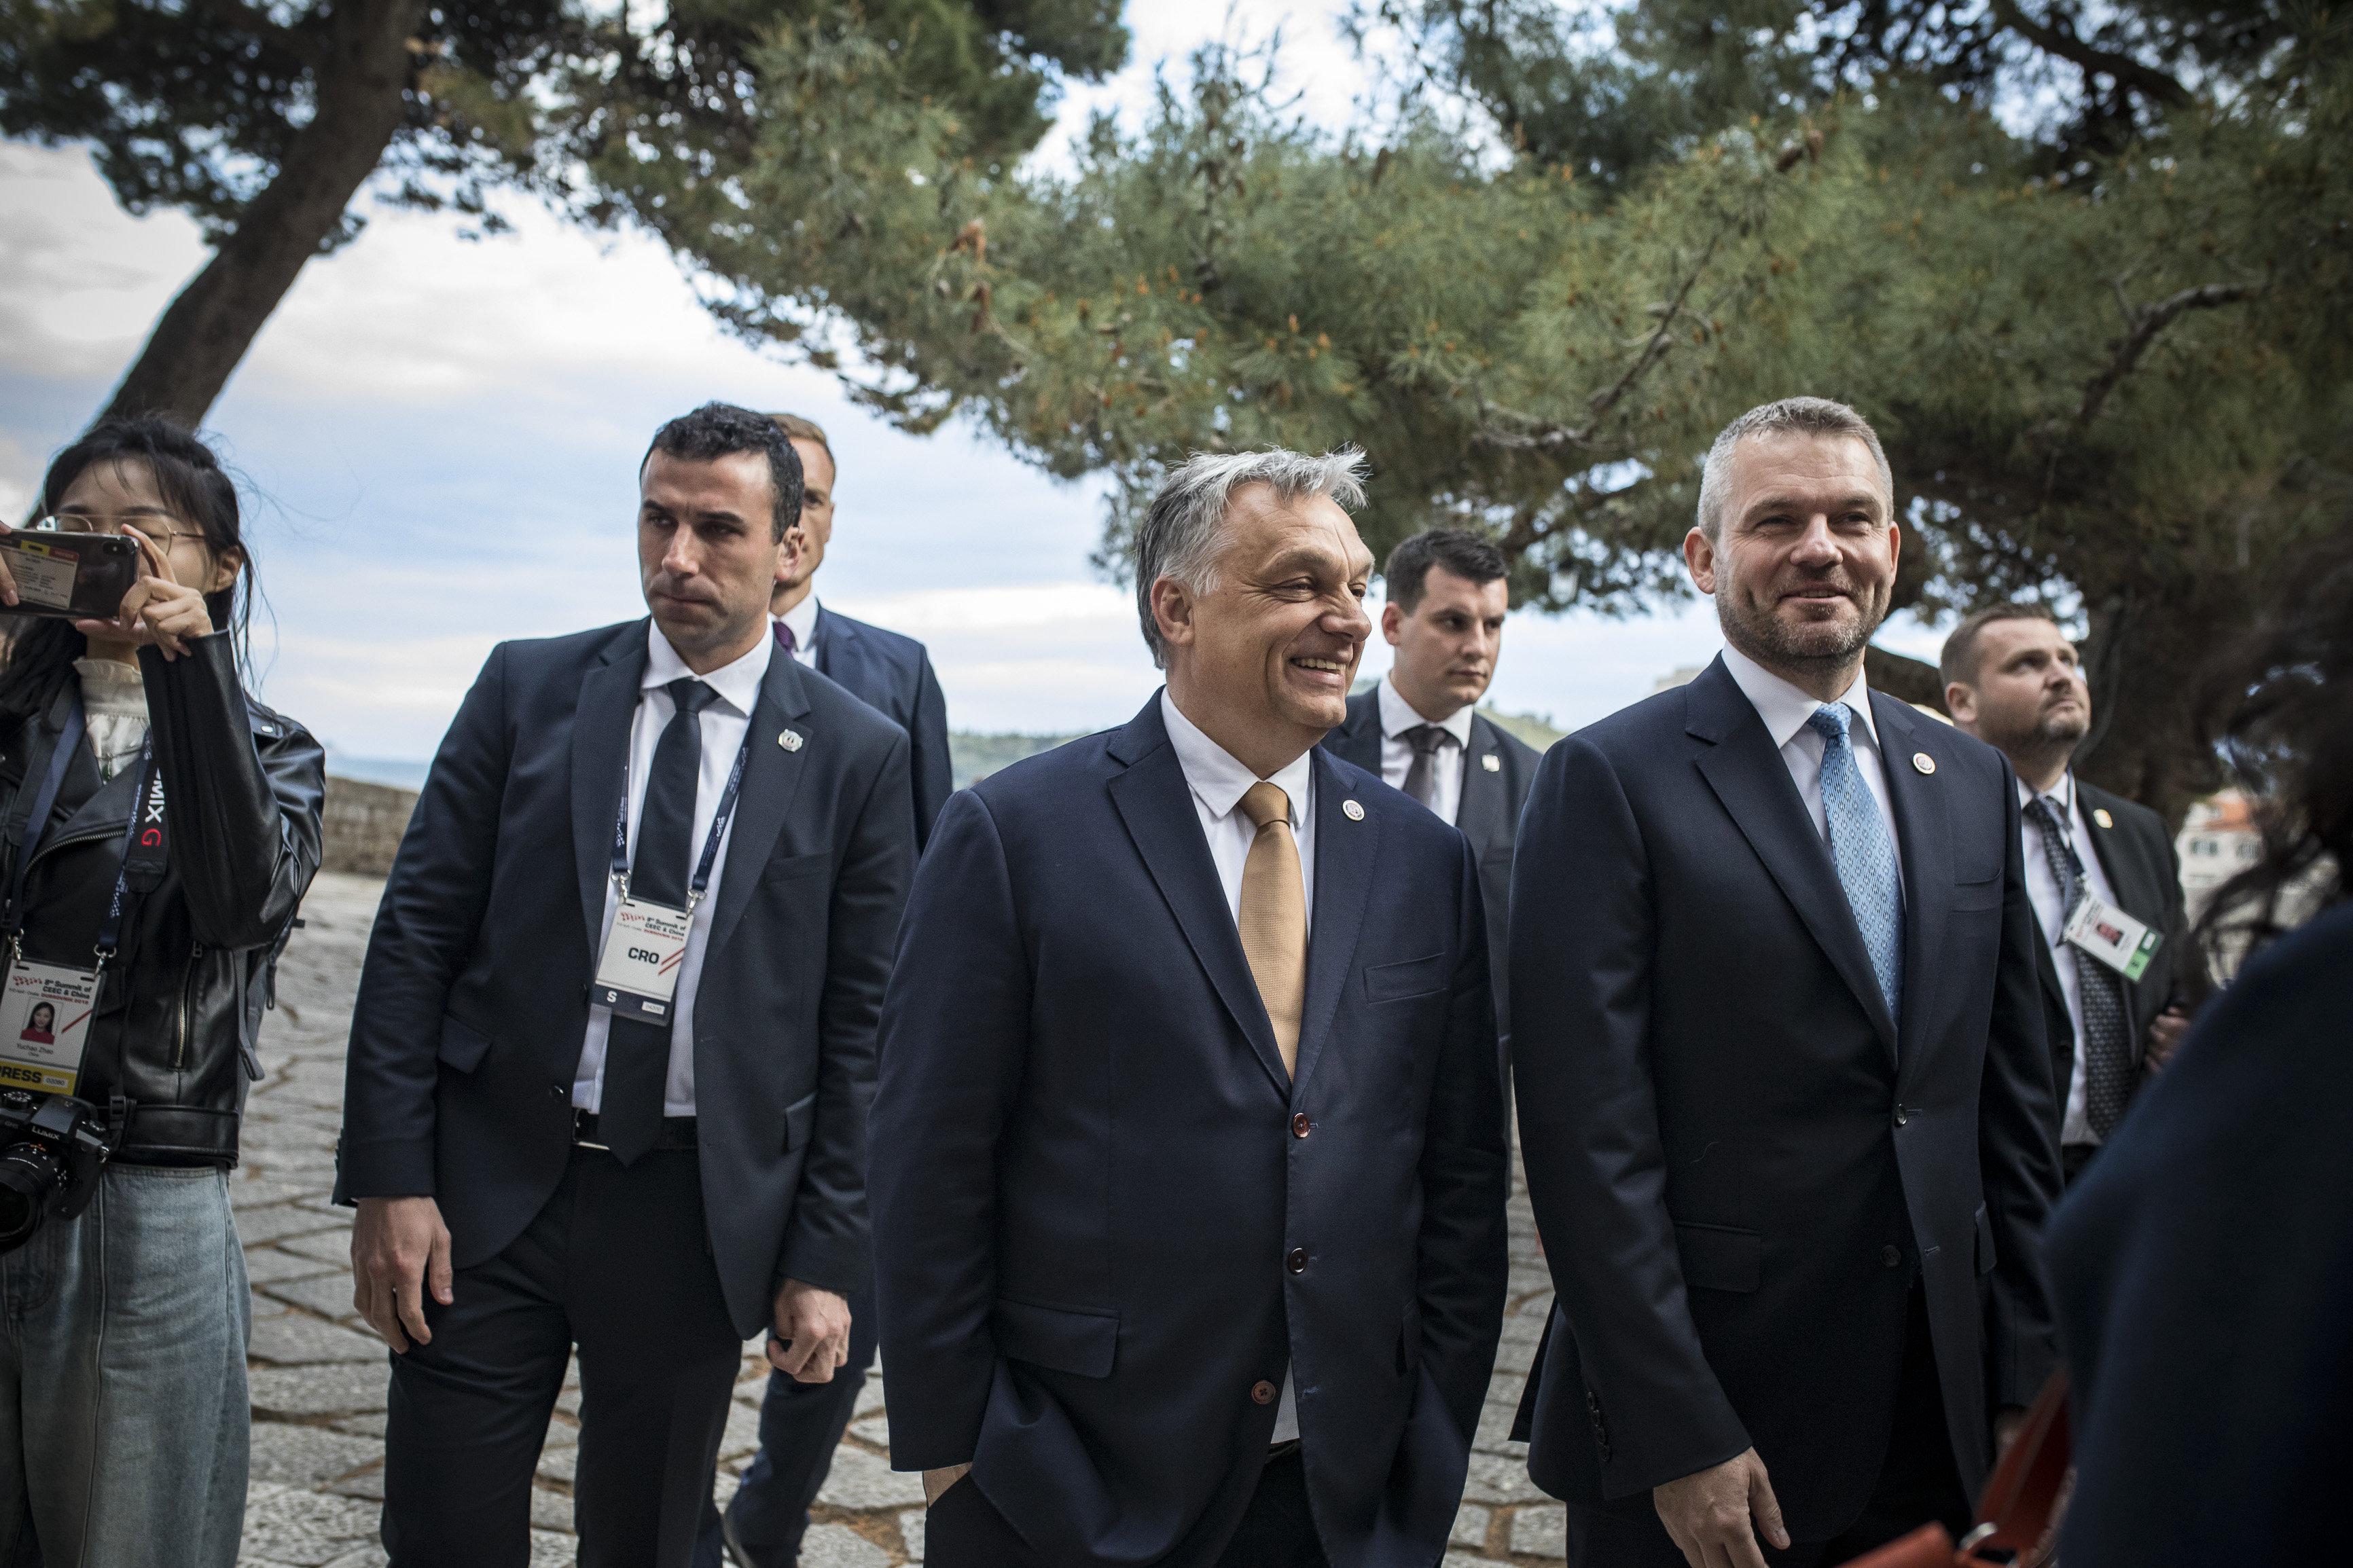 orbán at cce meeting